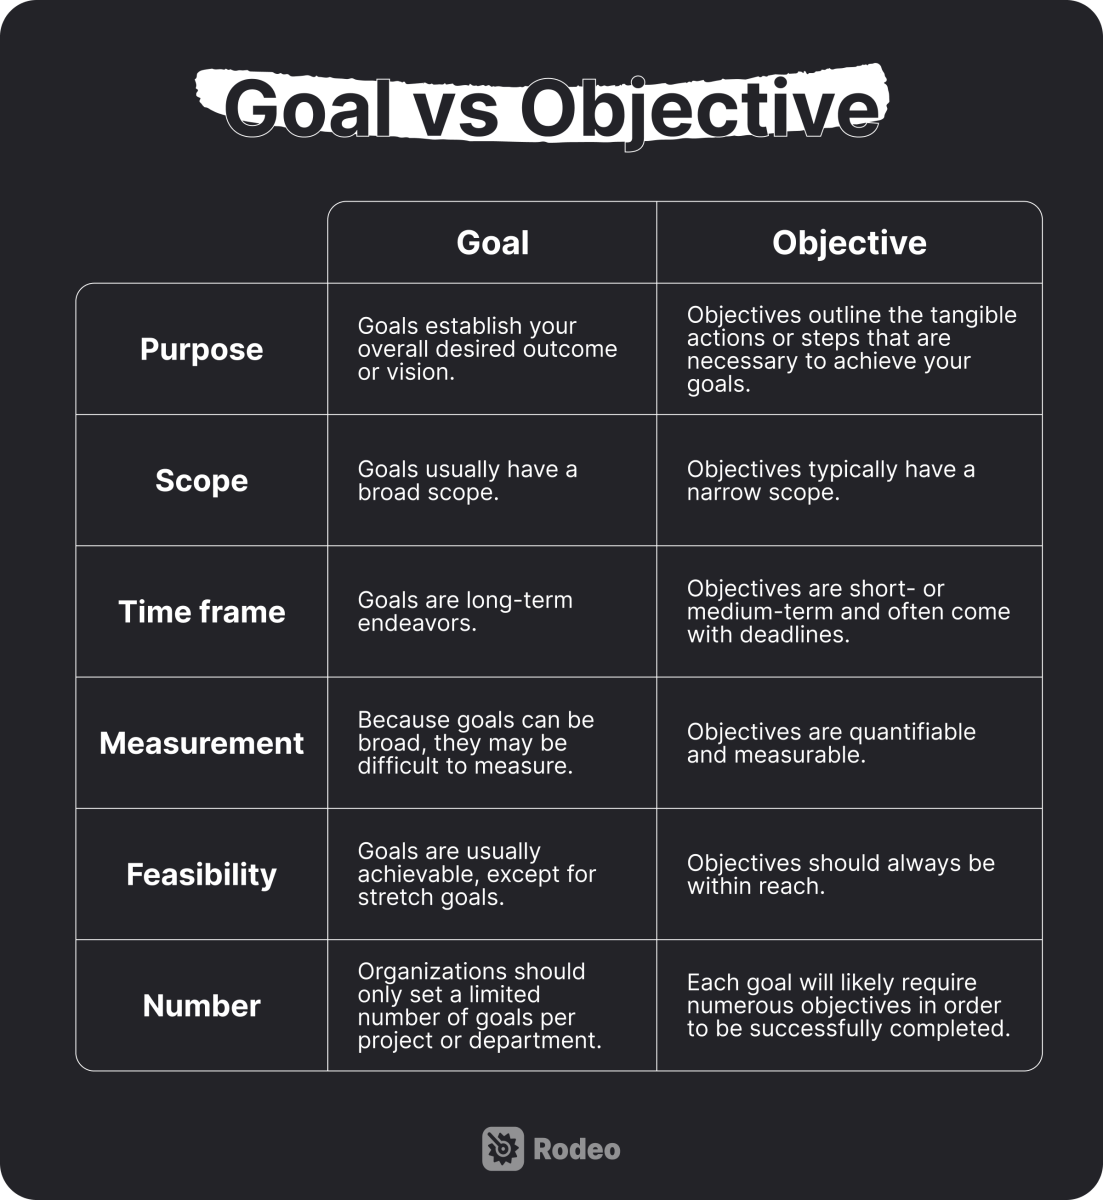 Table depicting the differences between goals and objectives